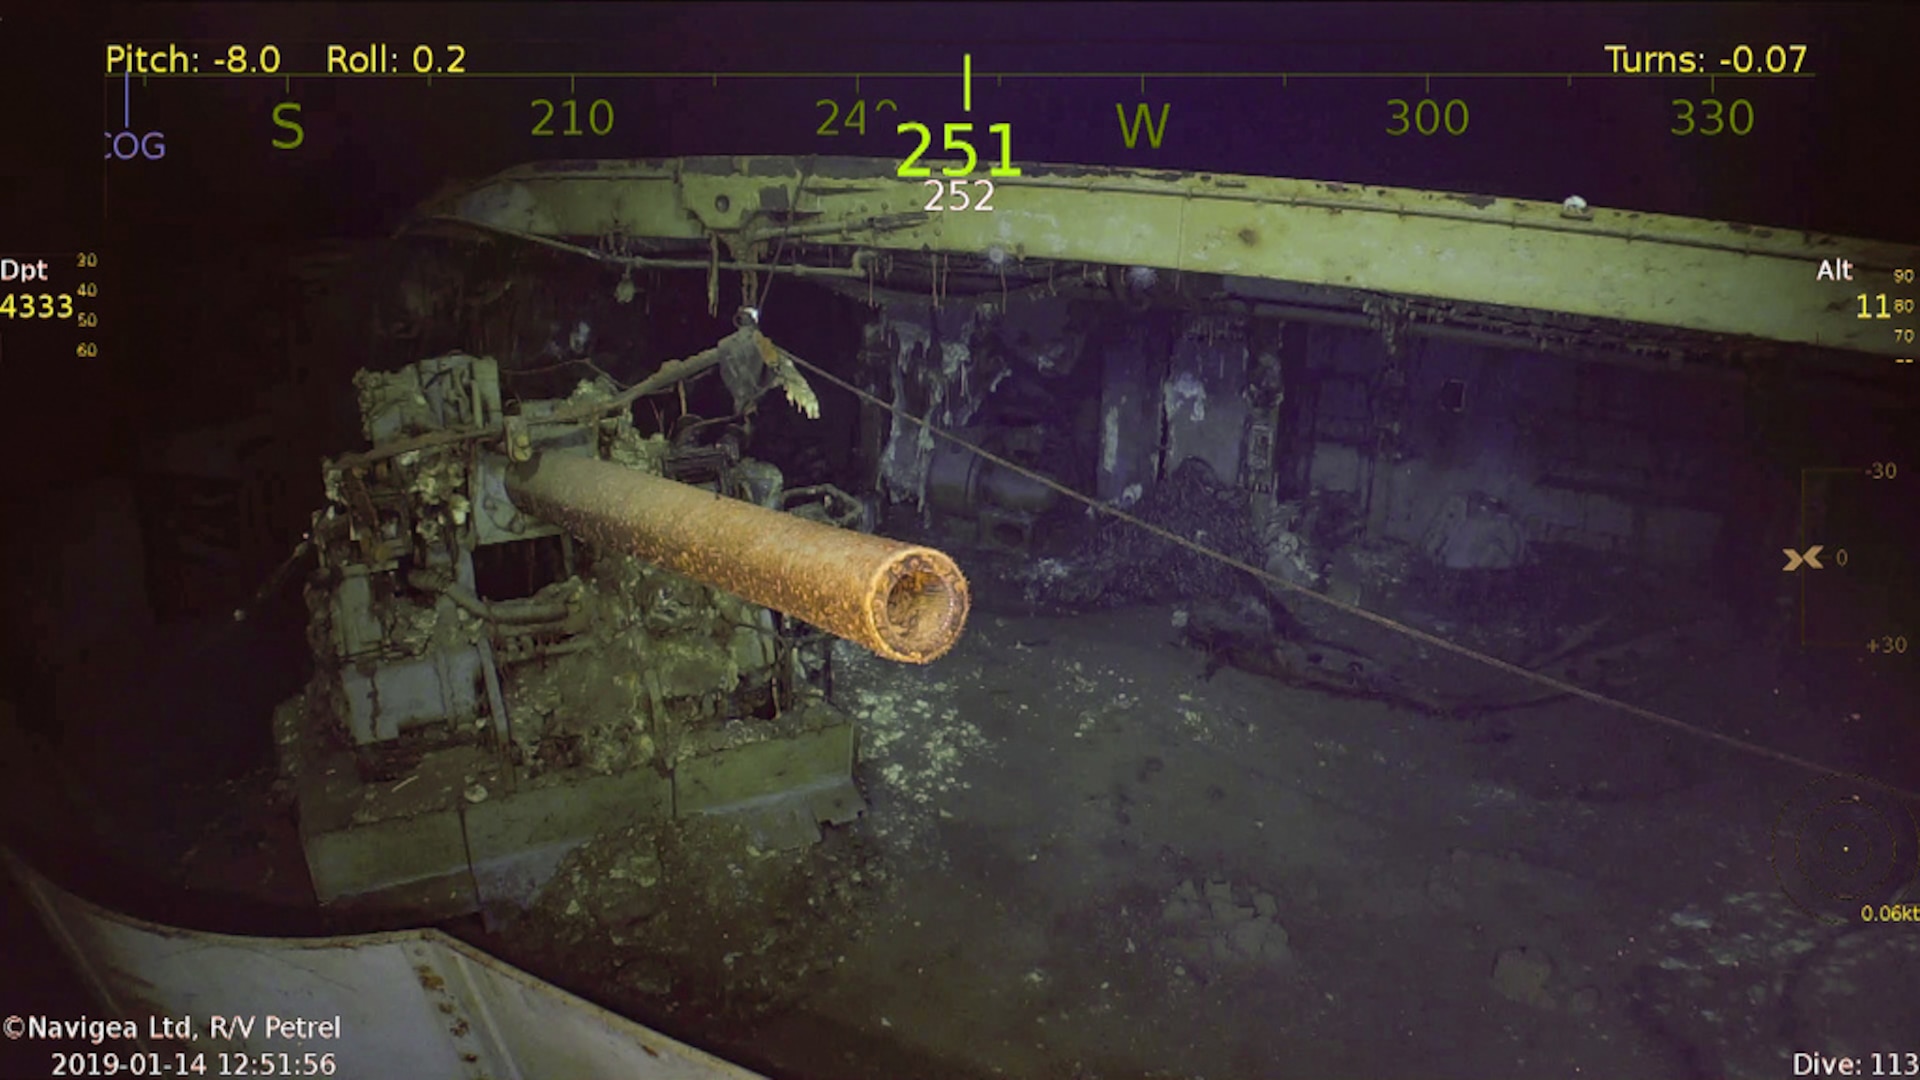 Wreckage of USS Wasp CV-7 Discovered in Coral Sea